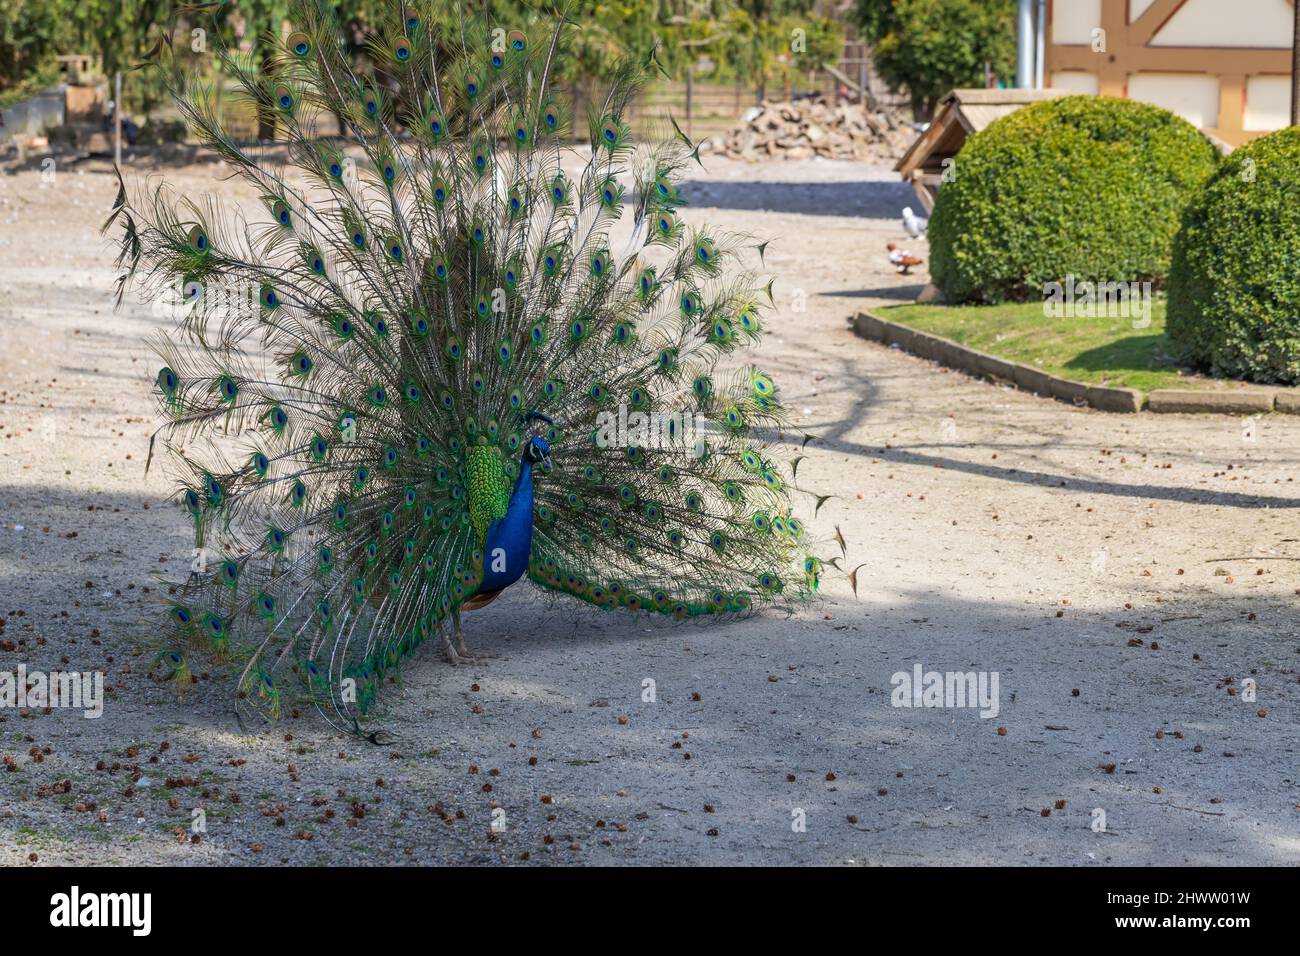 Beautiful colorful peacock bird. Head portrait. The peacock's tail is out behind him. Stock Photo